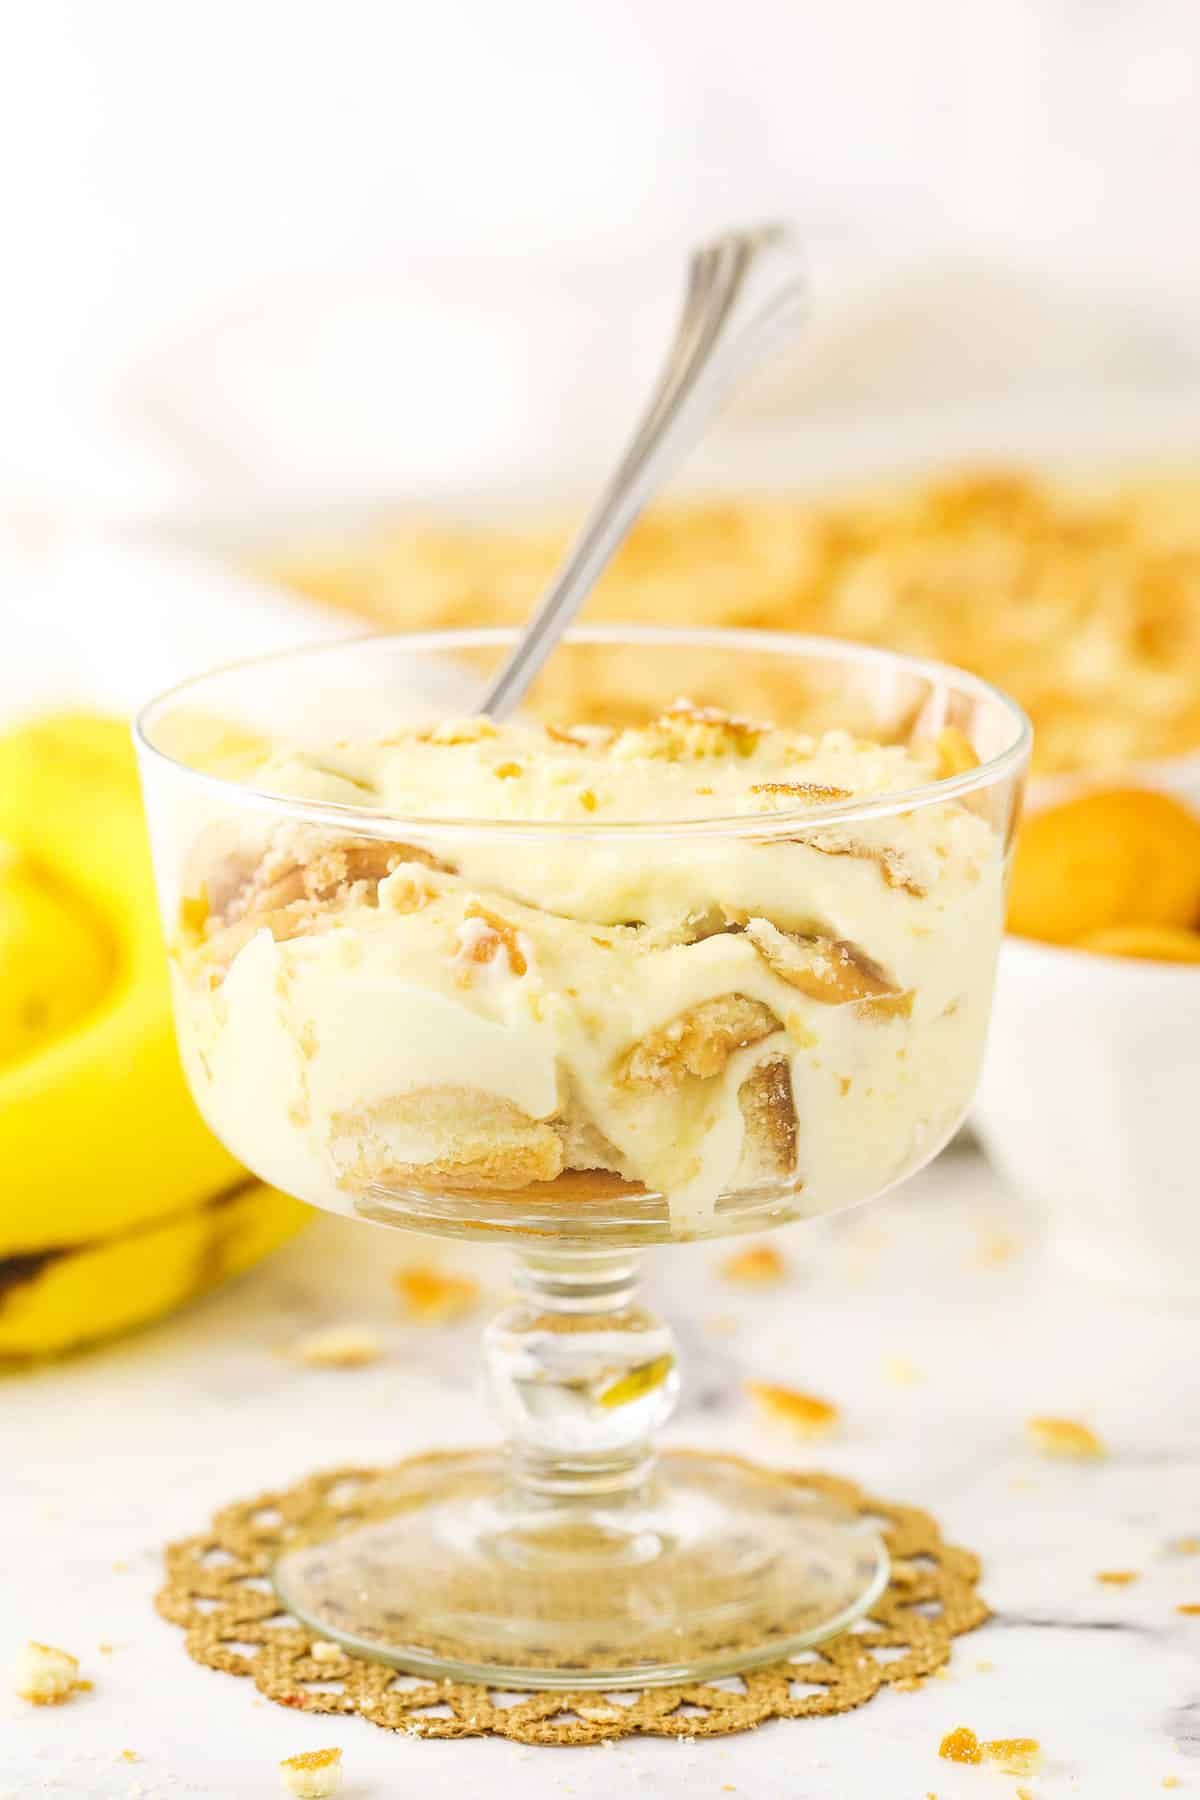 A single serving of Homemade Banana Pudding in a glass bowl with a spoon